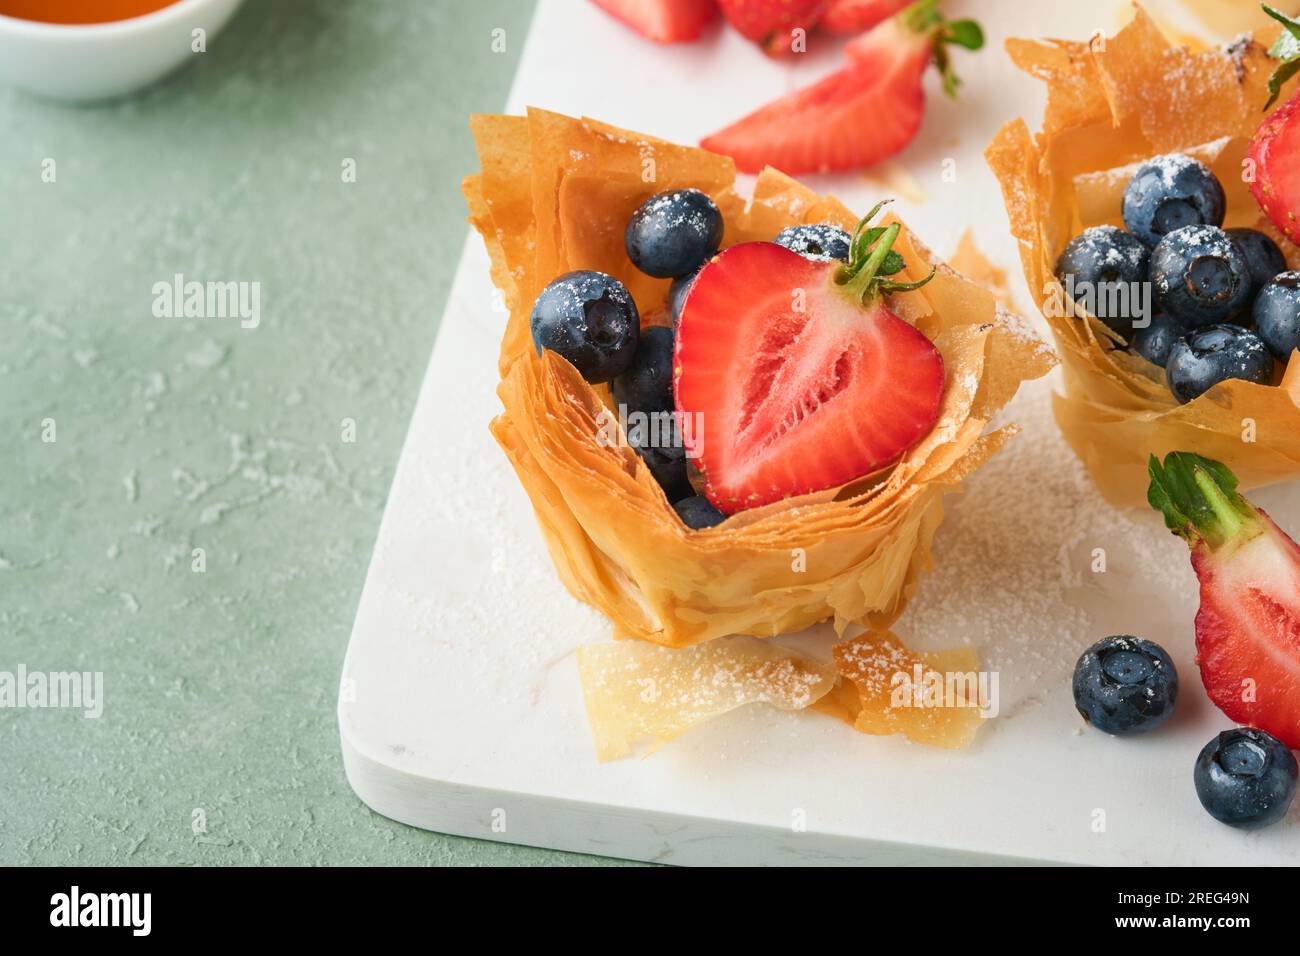 Phyllo or filo pies with fresh berries strawberries and blueberries, cheese filling topped with fresh mint on white plate. Homemade Filo pastry pasket Stock Photo